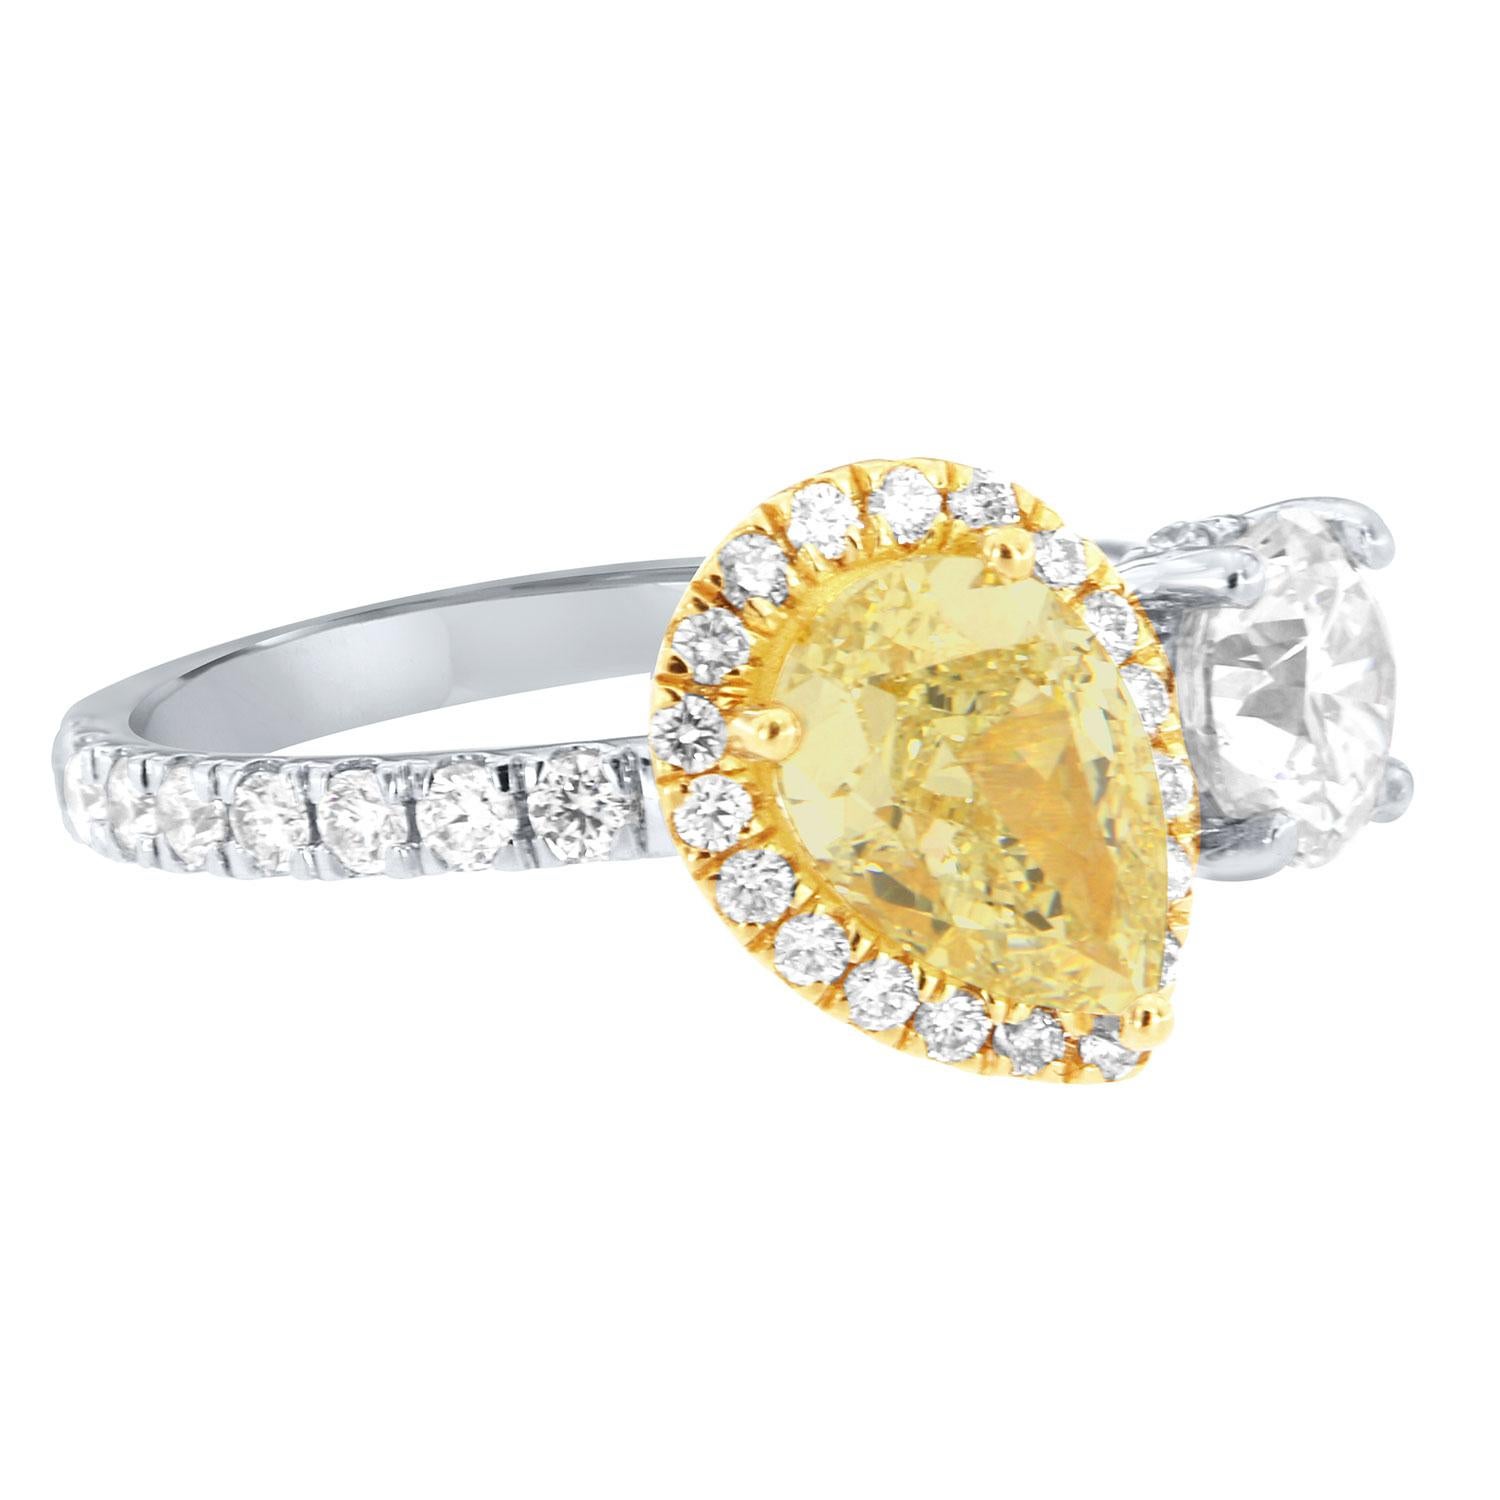 Pear Cut EGL 3.02 Carat TW 14K White & Yellow Gold Pear & Round Shape Halo Diamond Ring For Sale